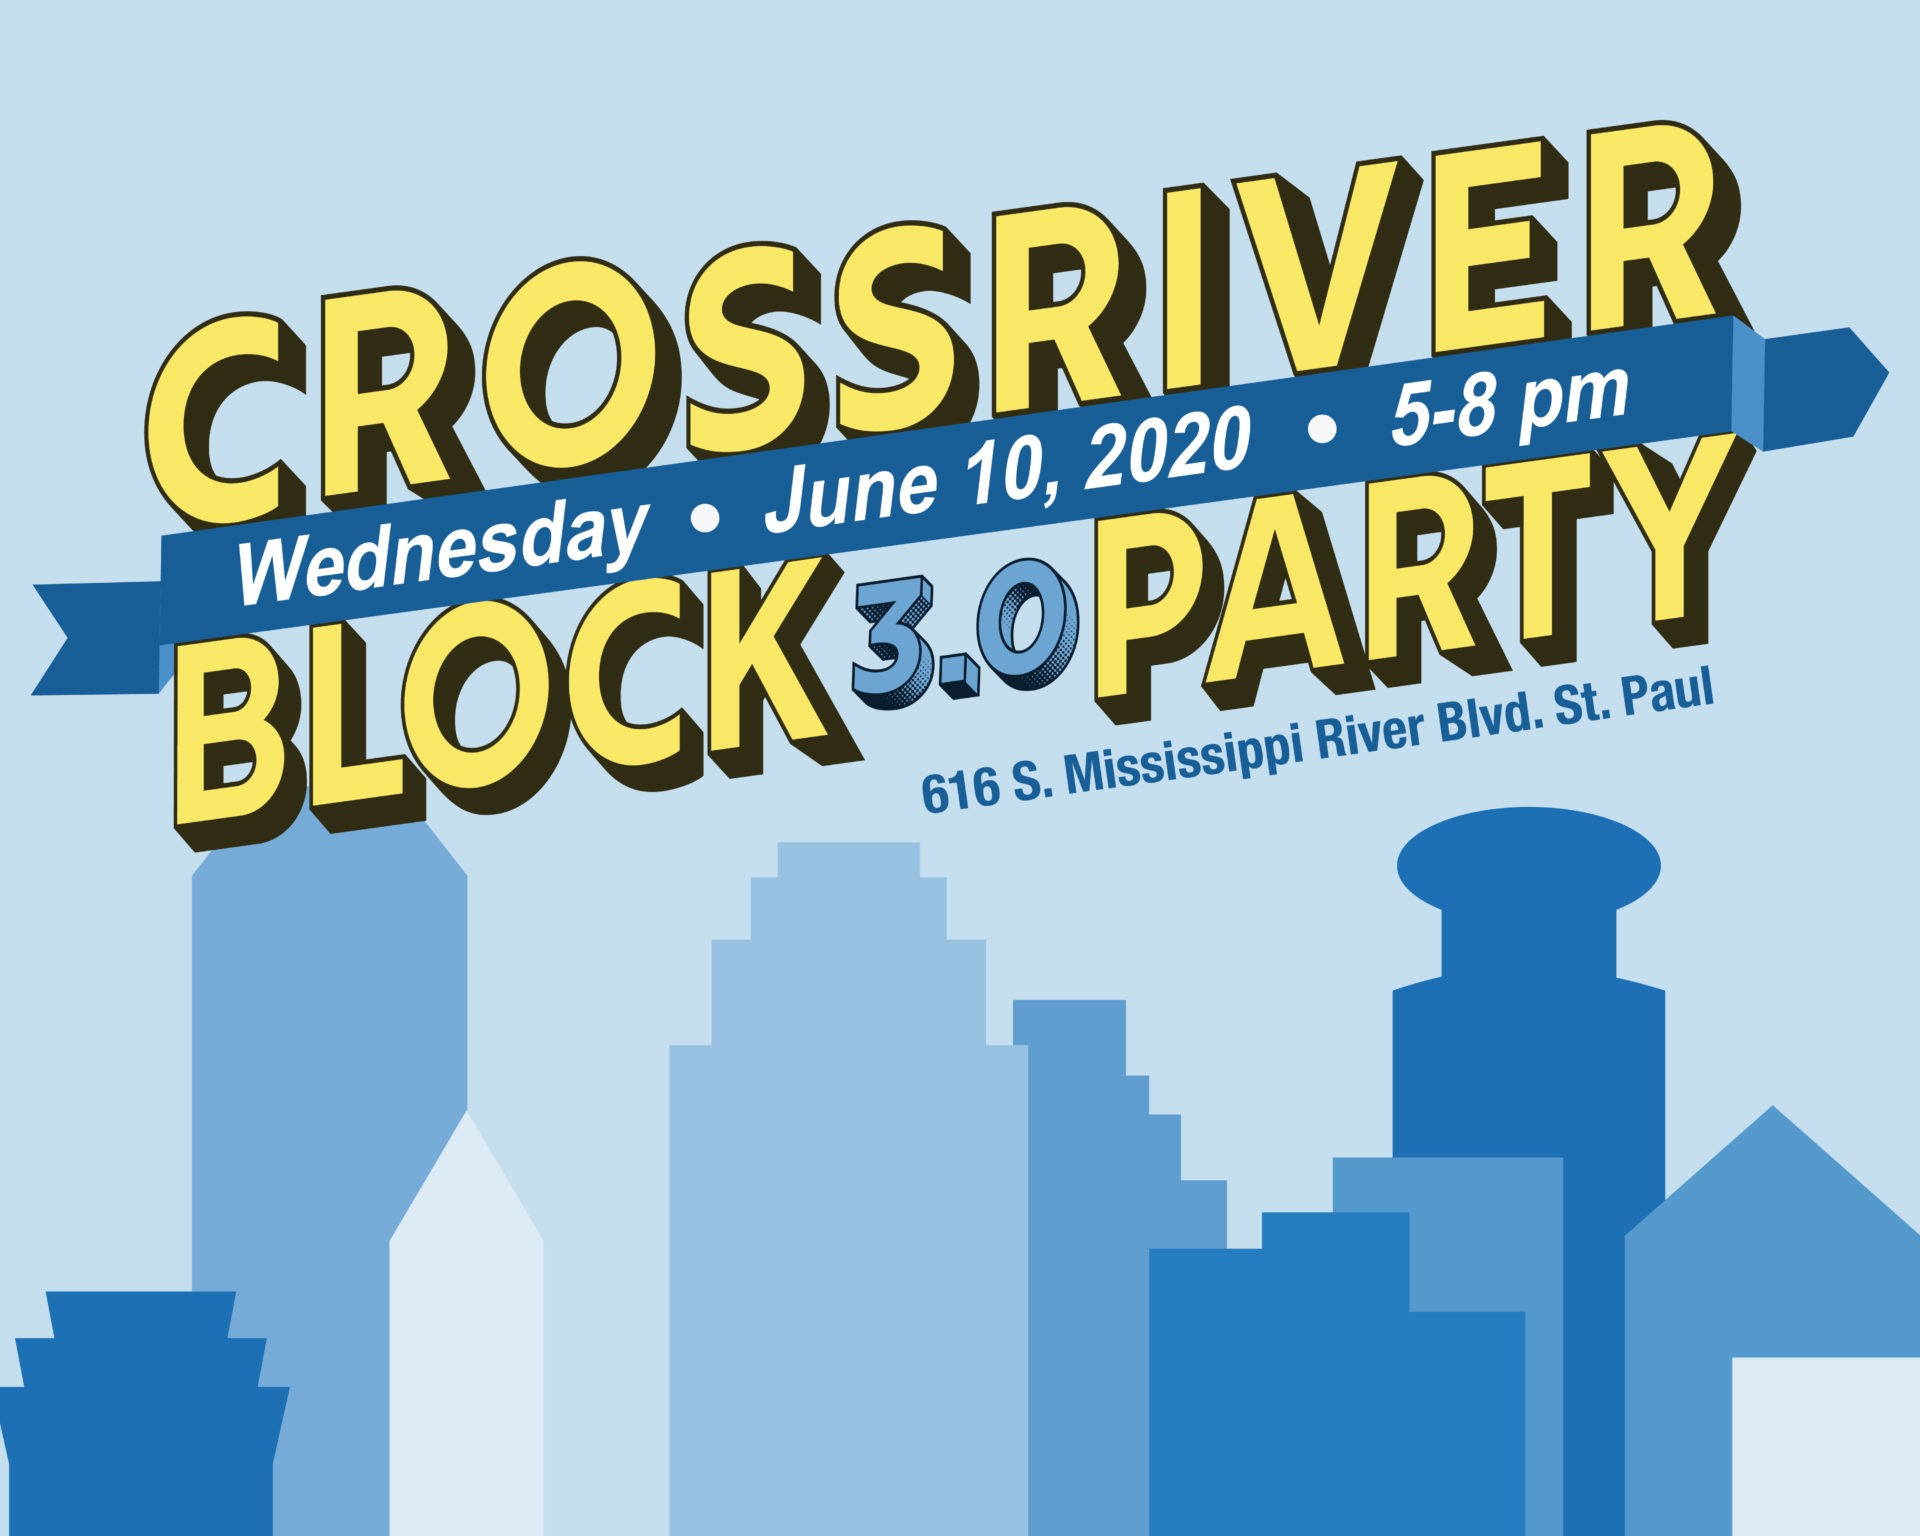 Crossriver Block Party 3.0